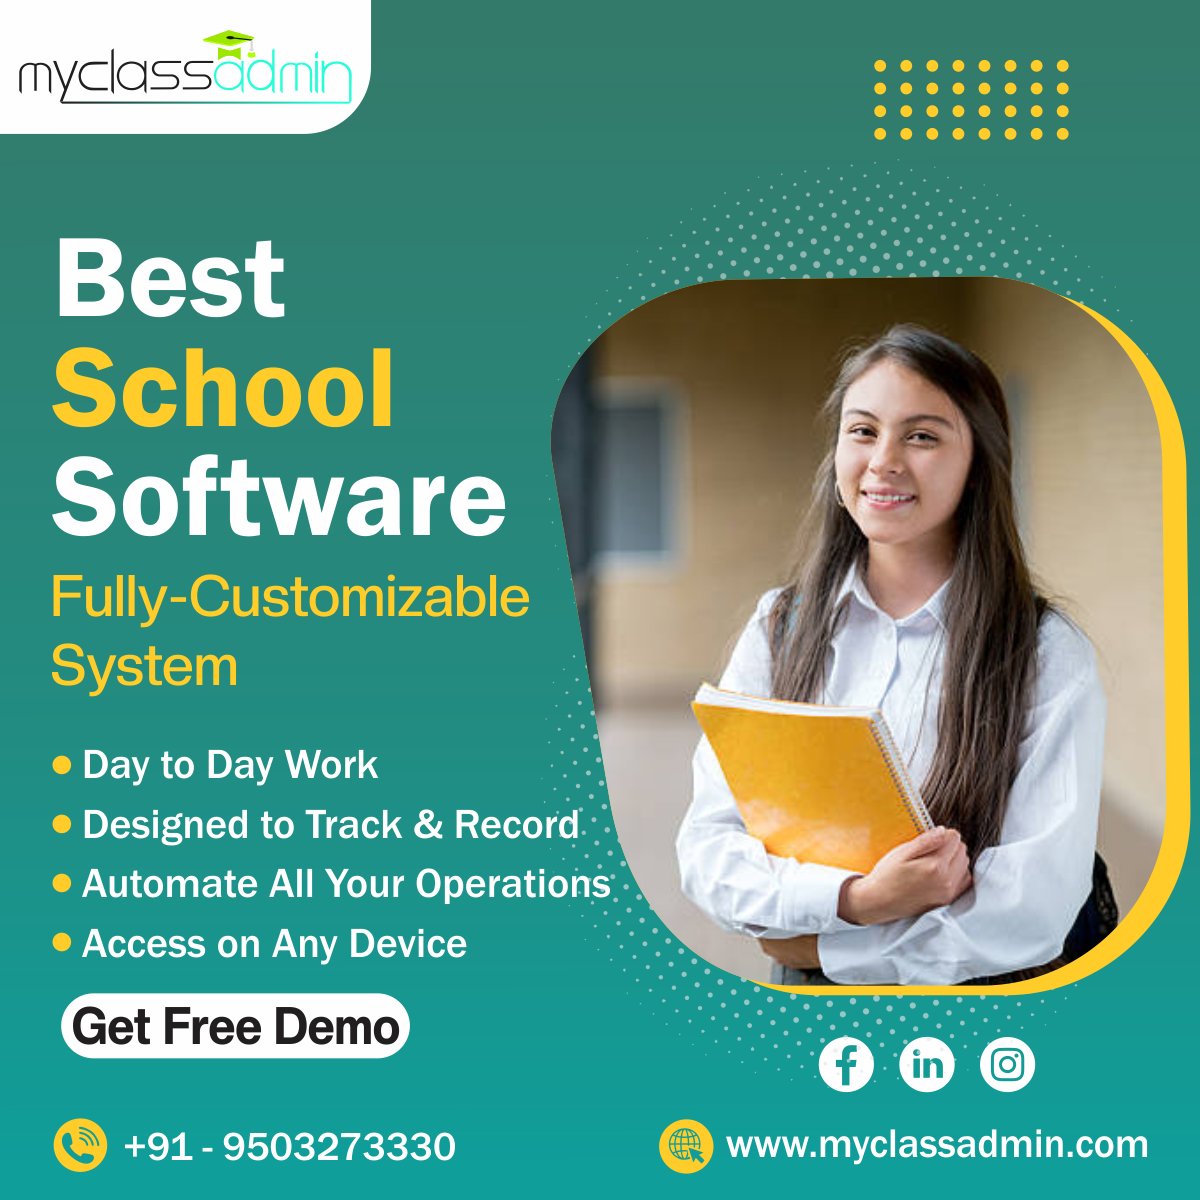 Fully Digital School Management Software for All Levels of Educational Institutes.

Today Sign Up at myclassadmin.com & Call Us at +91-9503273330 for more info.

#schoolmanagementsystem #schoolsoftware #schoolmanagementapp #studentmanagementsystem #classmanagementsoftware